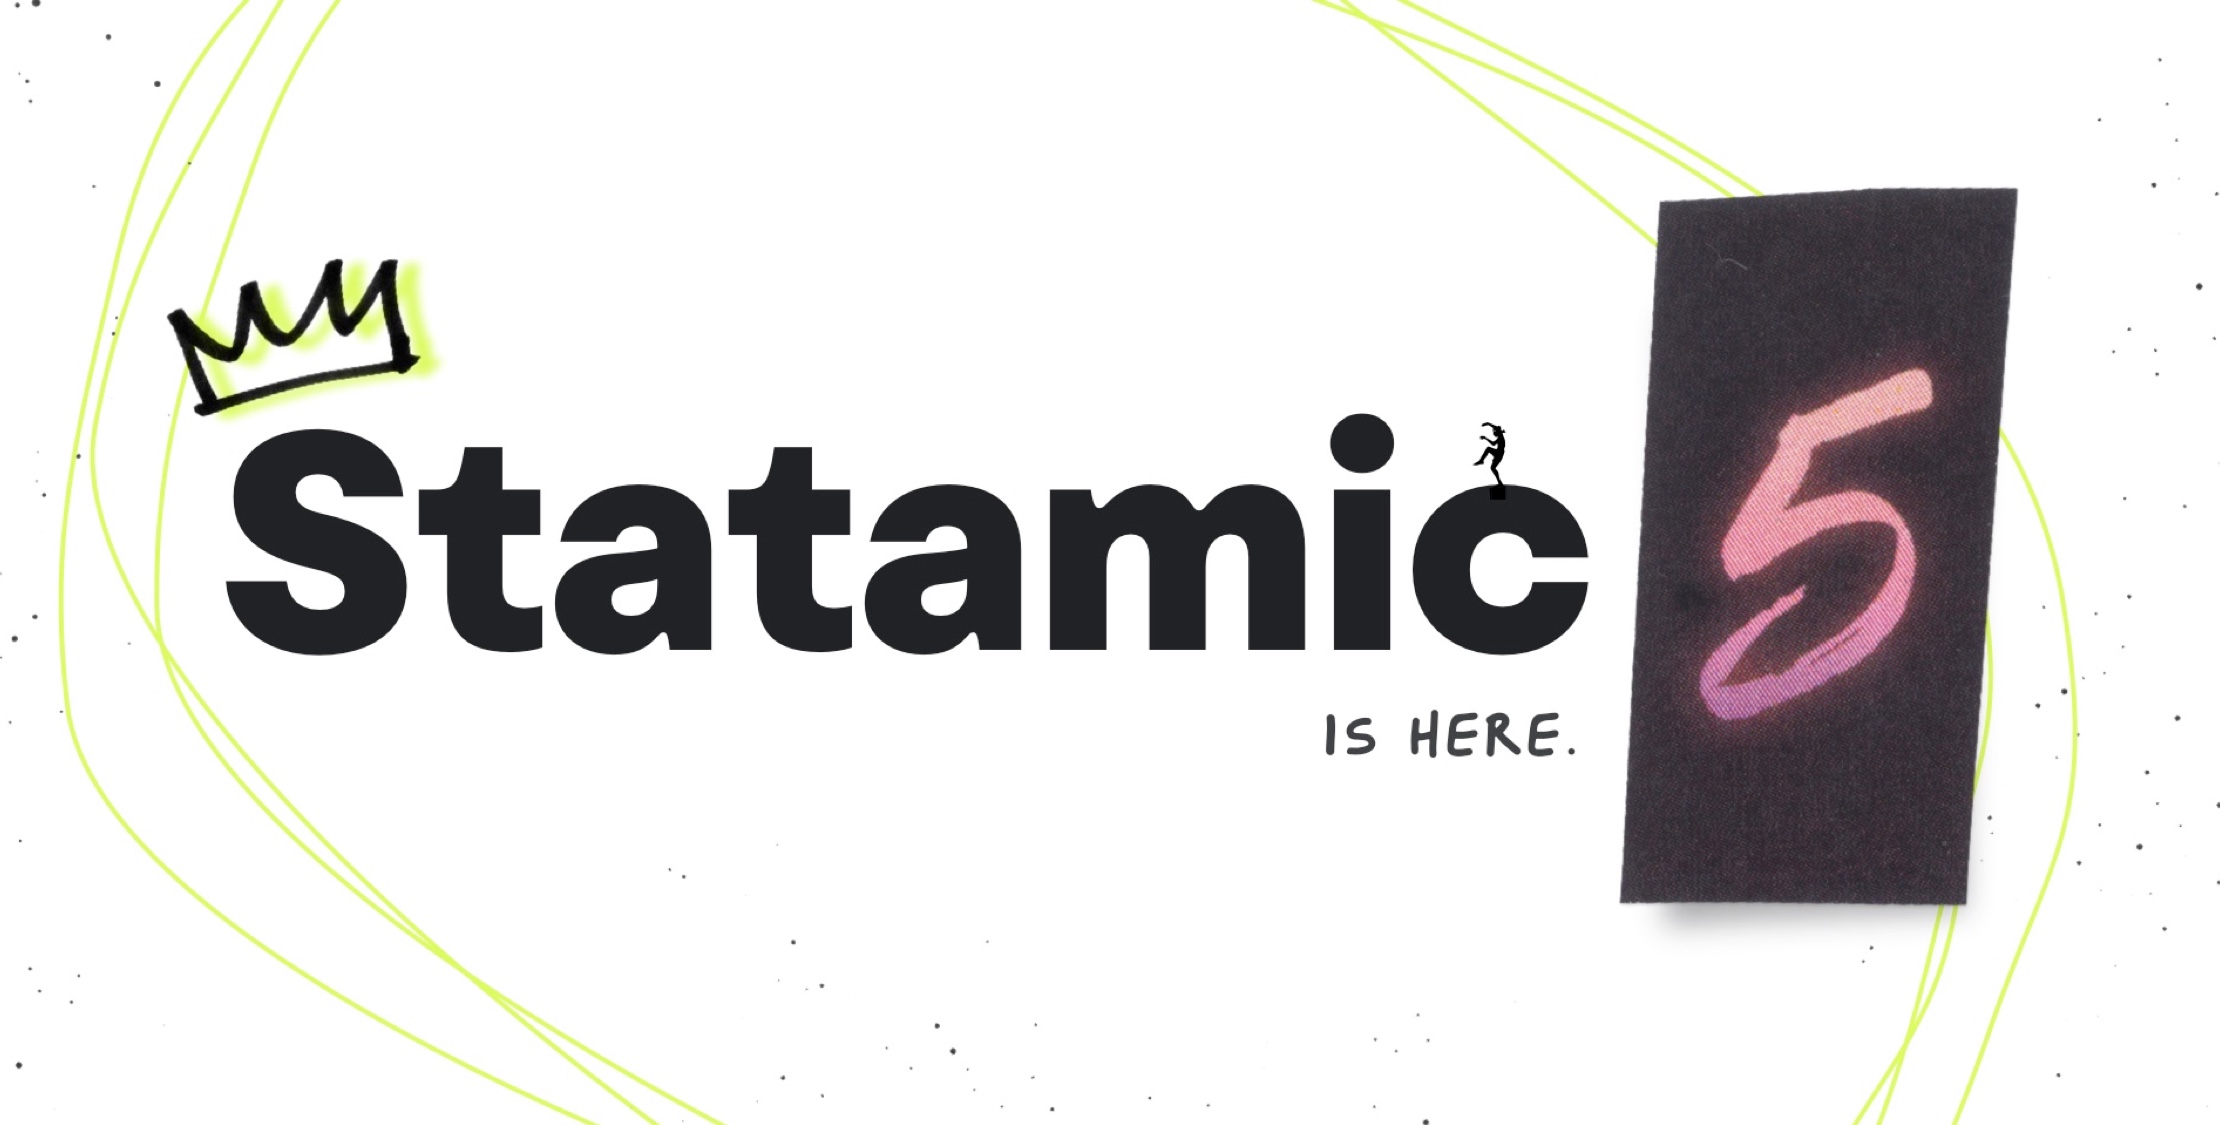 Statamic 5 is released! image